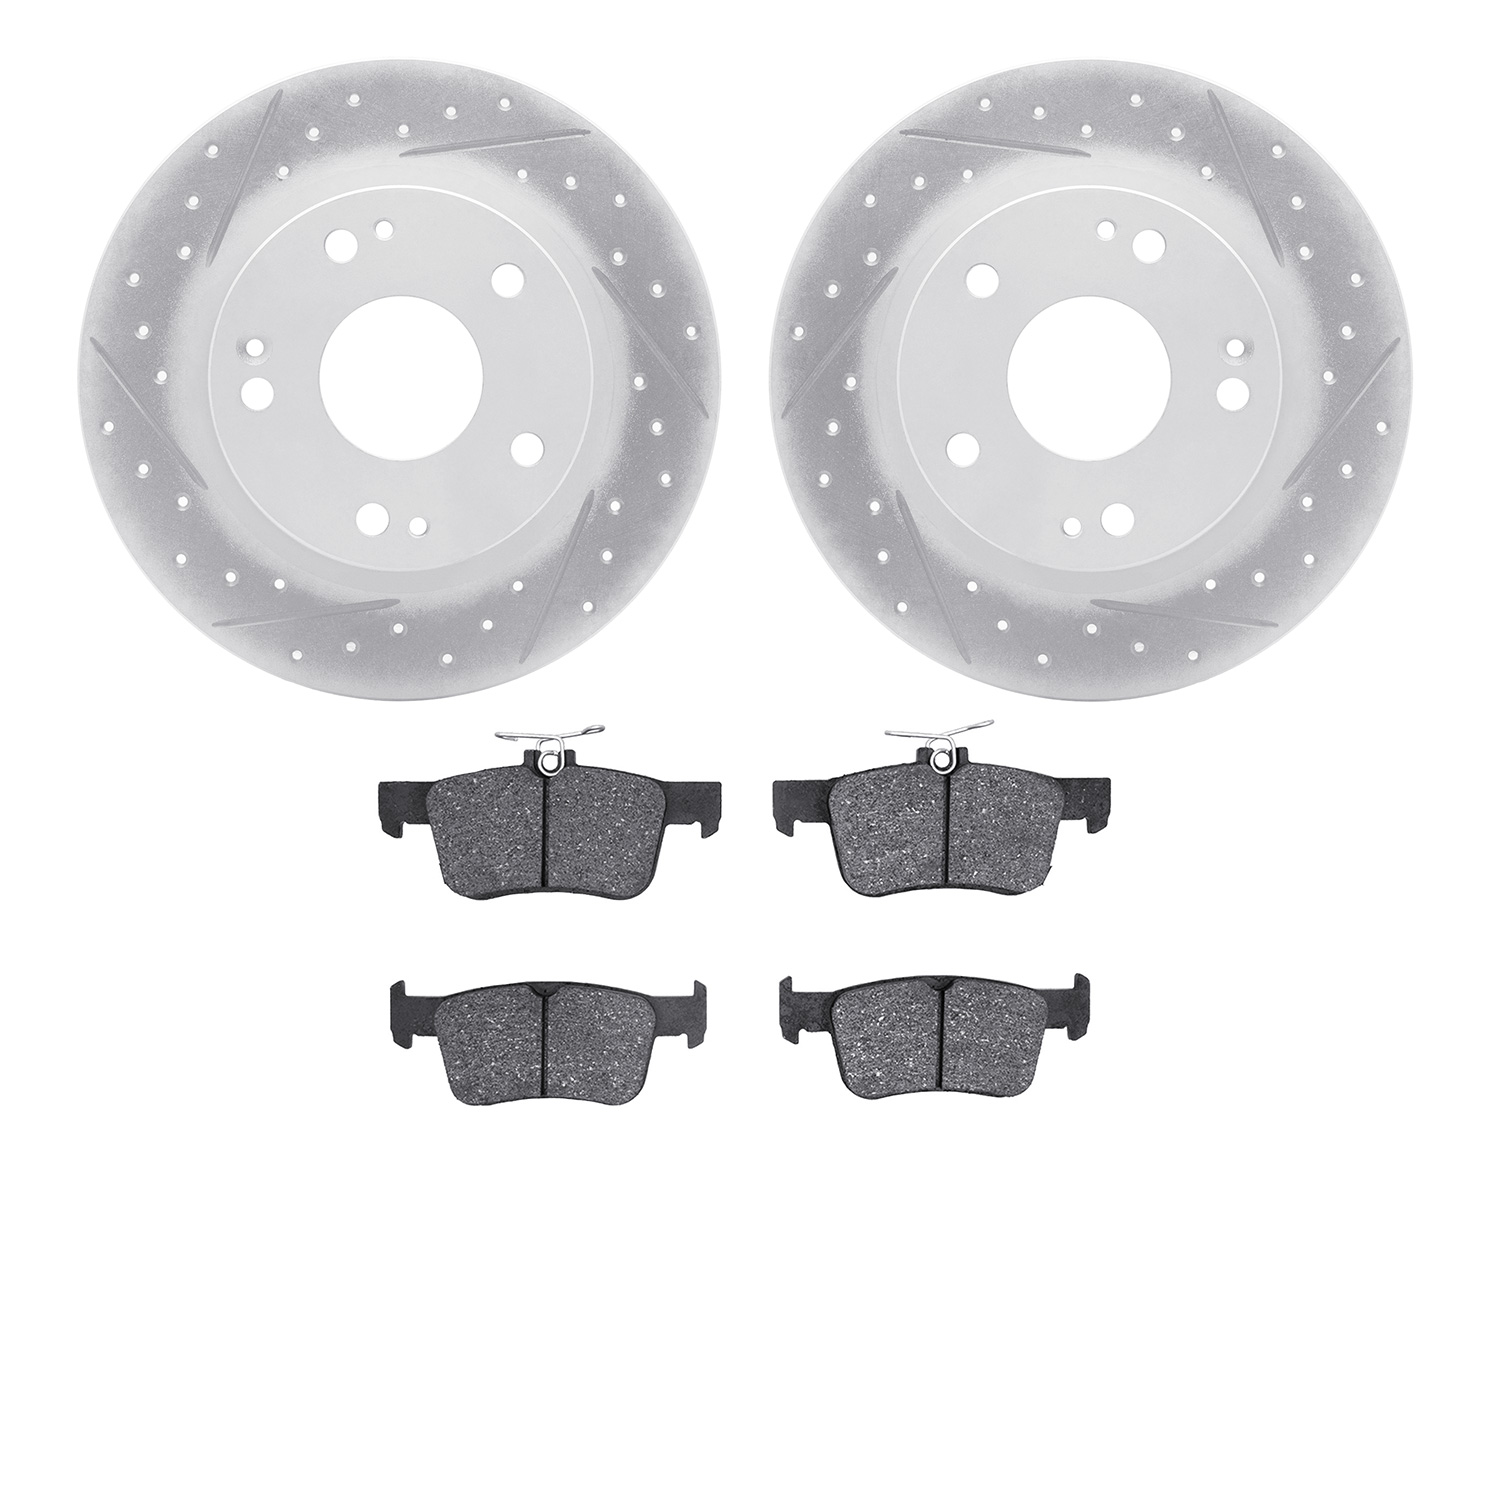 2502-59087 Geoperformance Drilled/Slotted Rotors w/5000 Advanced Brake Pads Kit, Fits Select Acura/Honda, Position: Rear